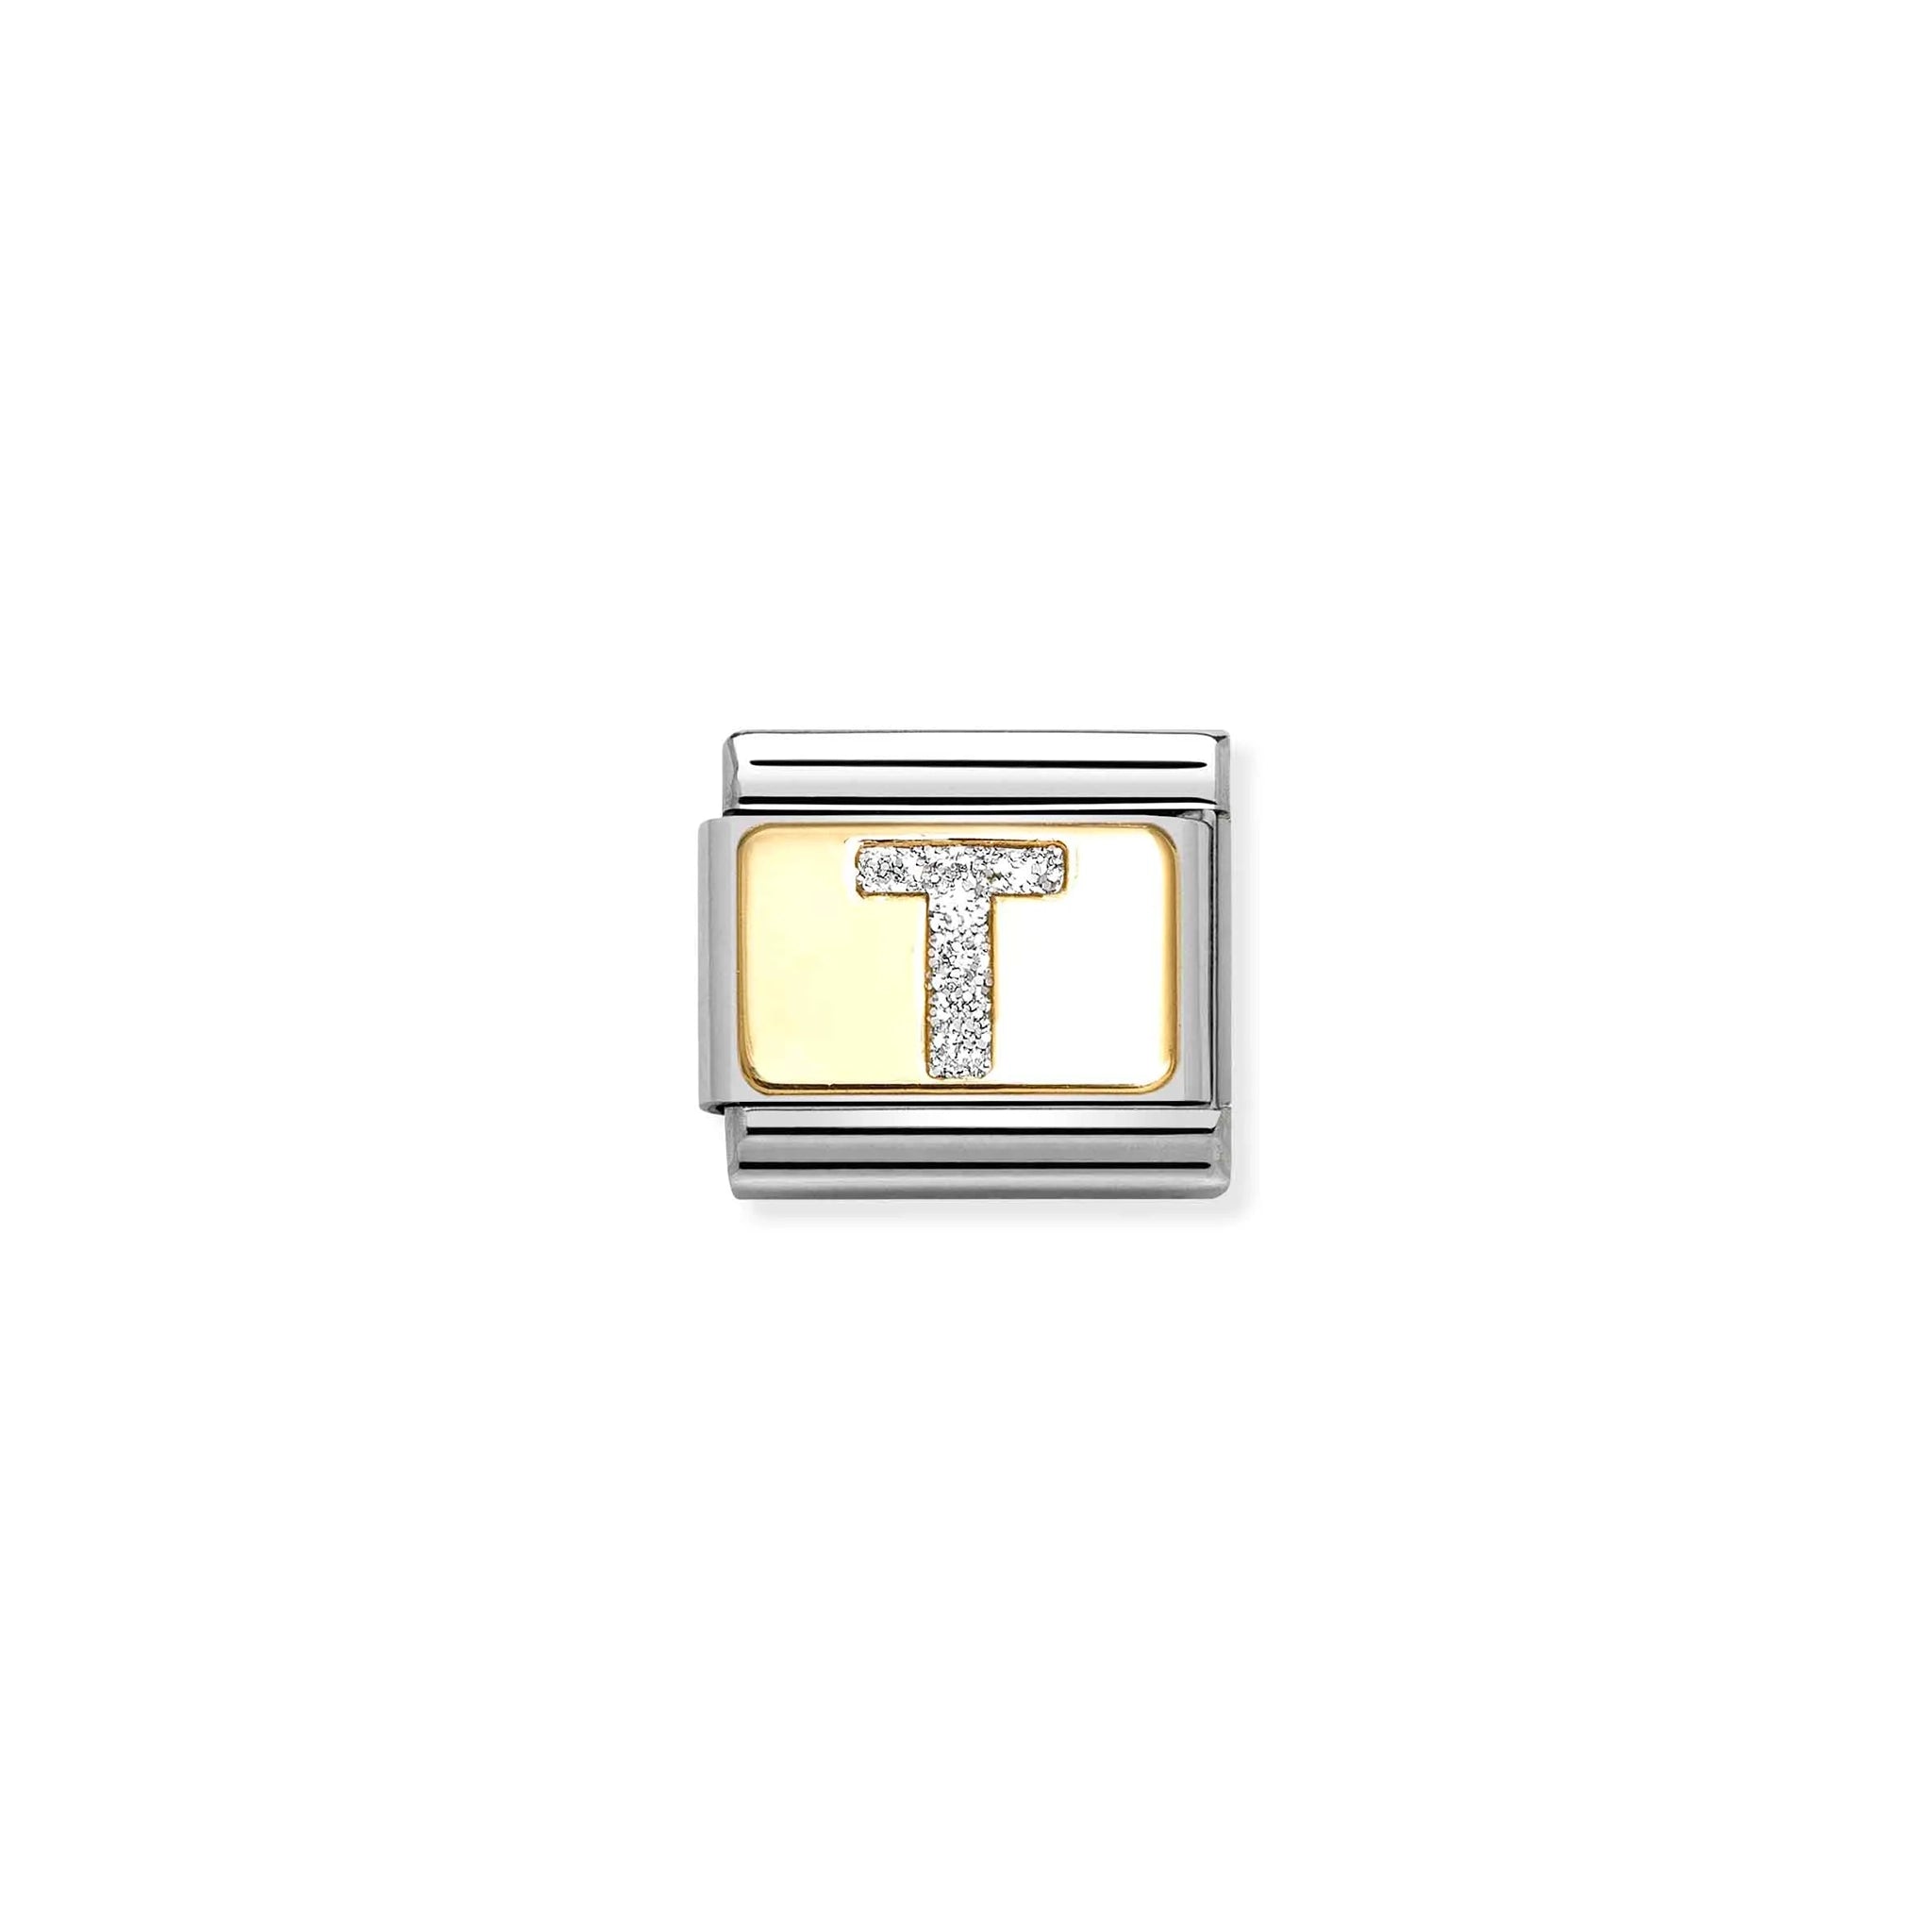 Nomination charm link featuring a gold plaque with a silver glitter letter T